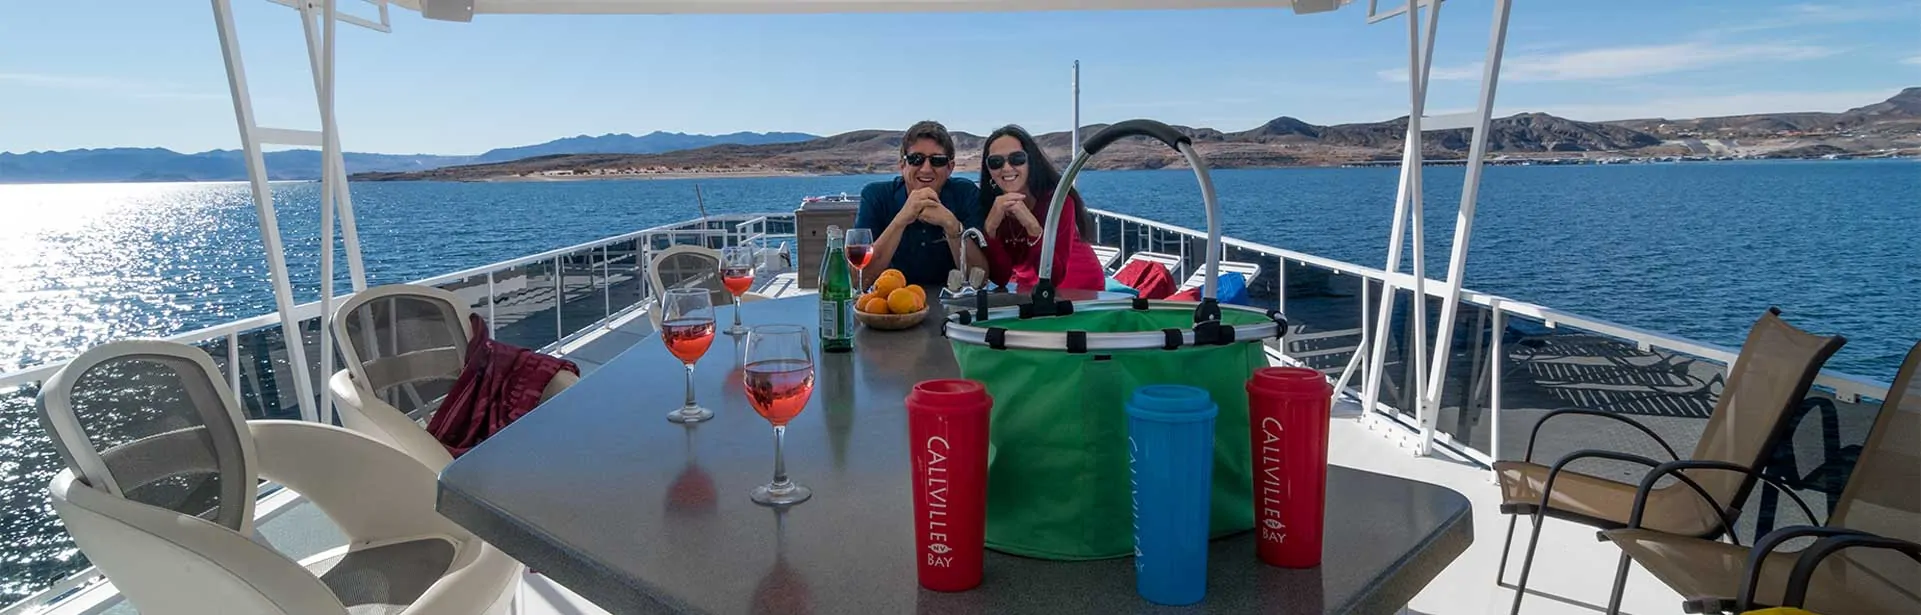 Couple at houseboat Table